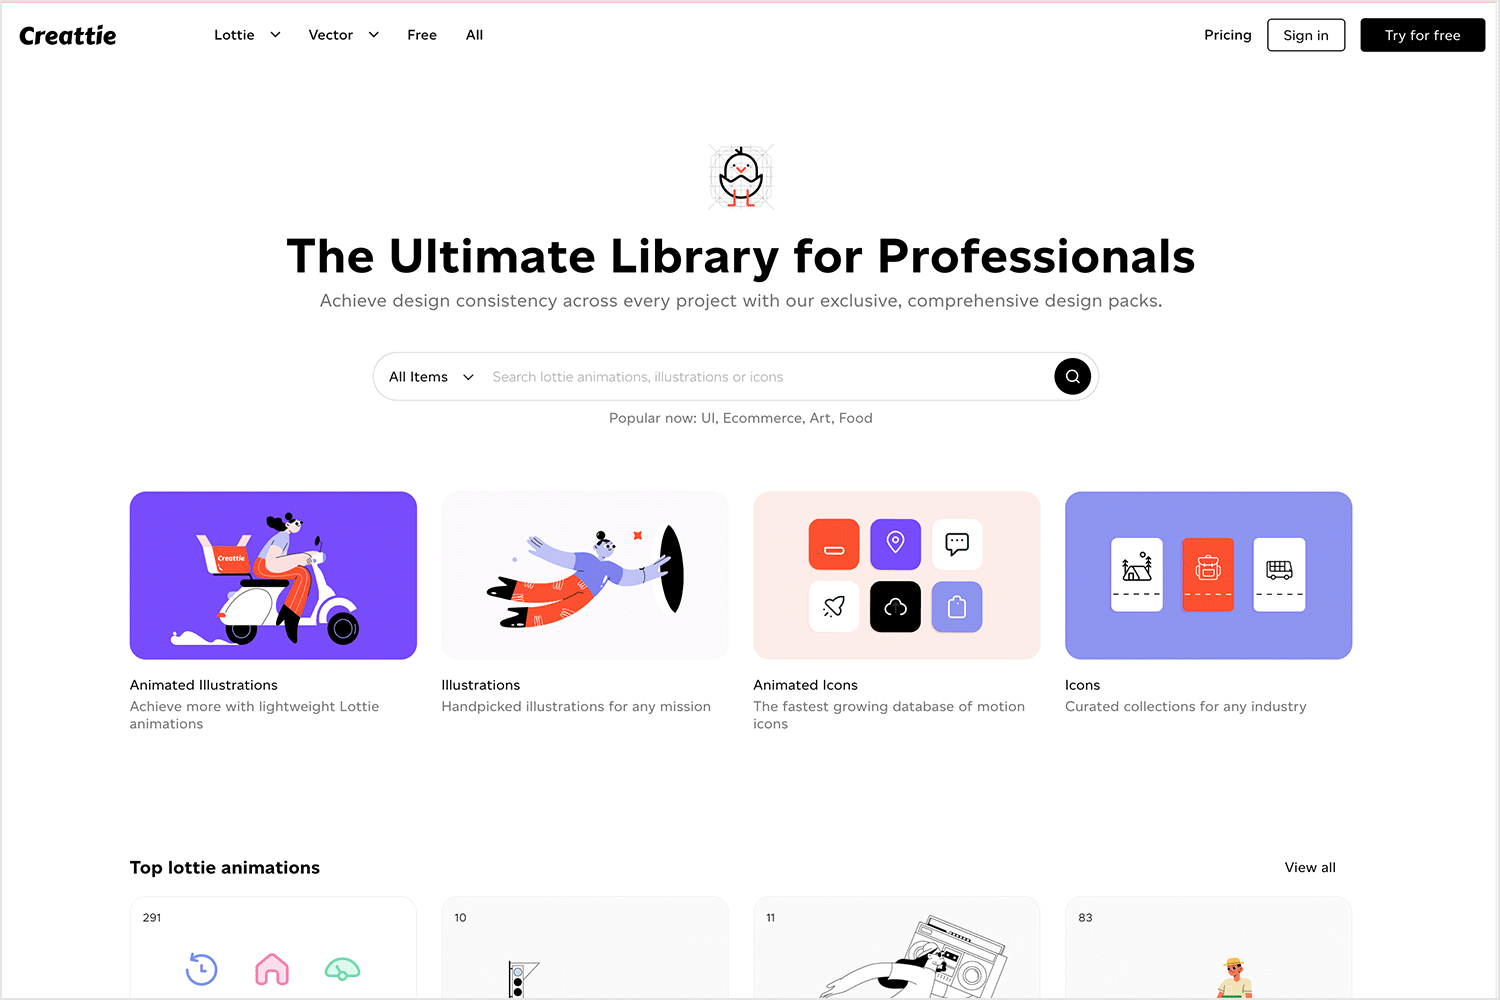 Creattie homepage featuring a variety of vector illustrations